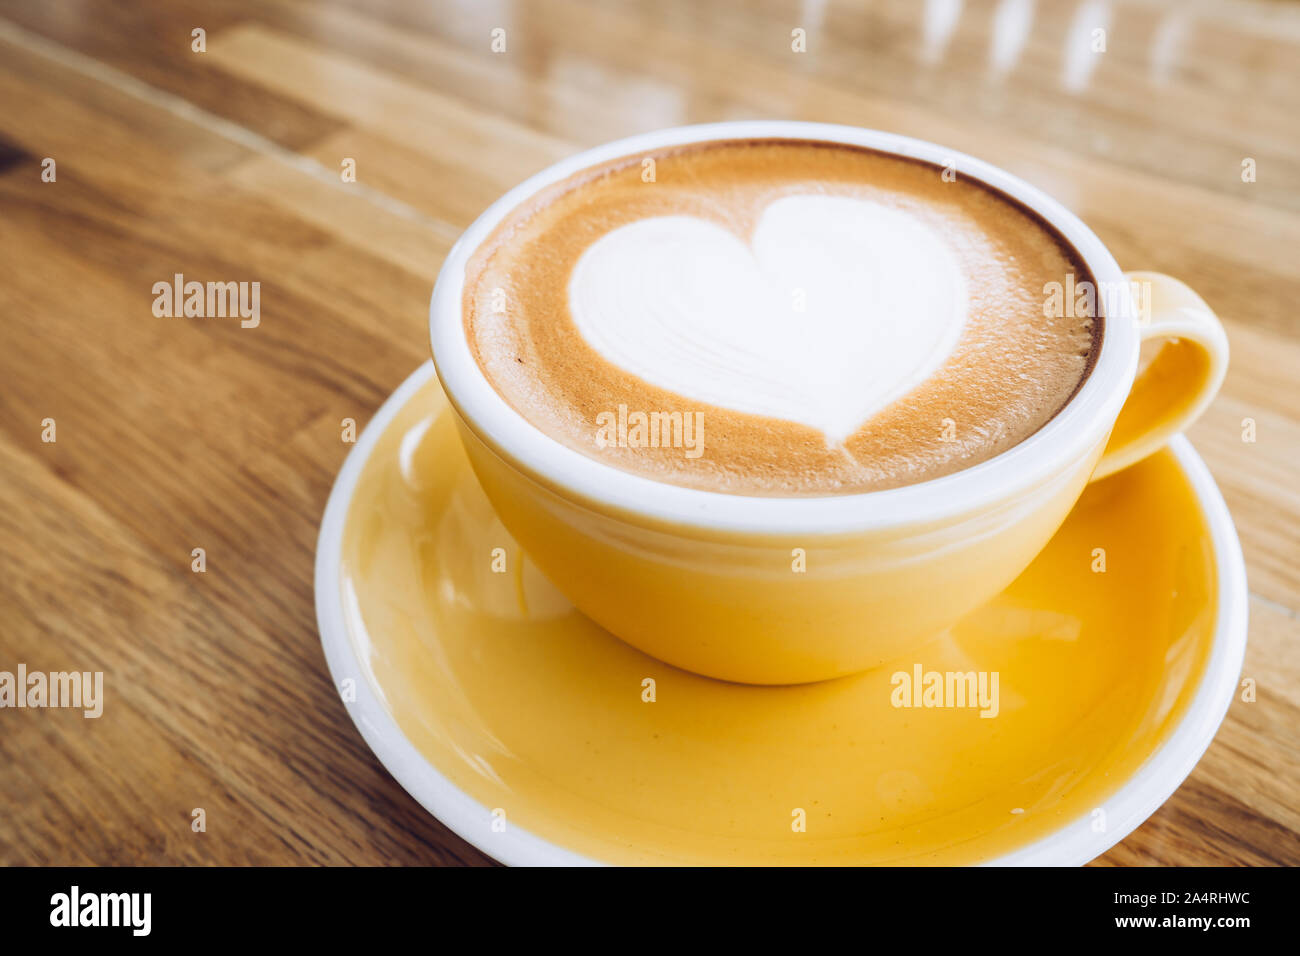 https://c8.alamy.com/comp/2A4RHWC/hot-cappuccino-coffee-cup-on-wooden-tray-with-heart-latte-art-on-wood-table-at-cafebanner-size-food-and-drink-concept-2A4RHWC.jpg